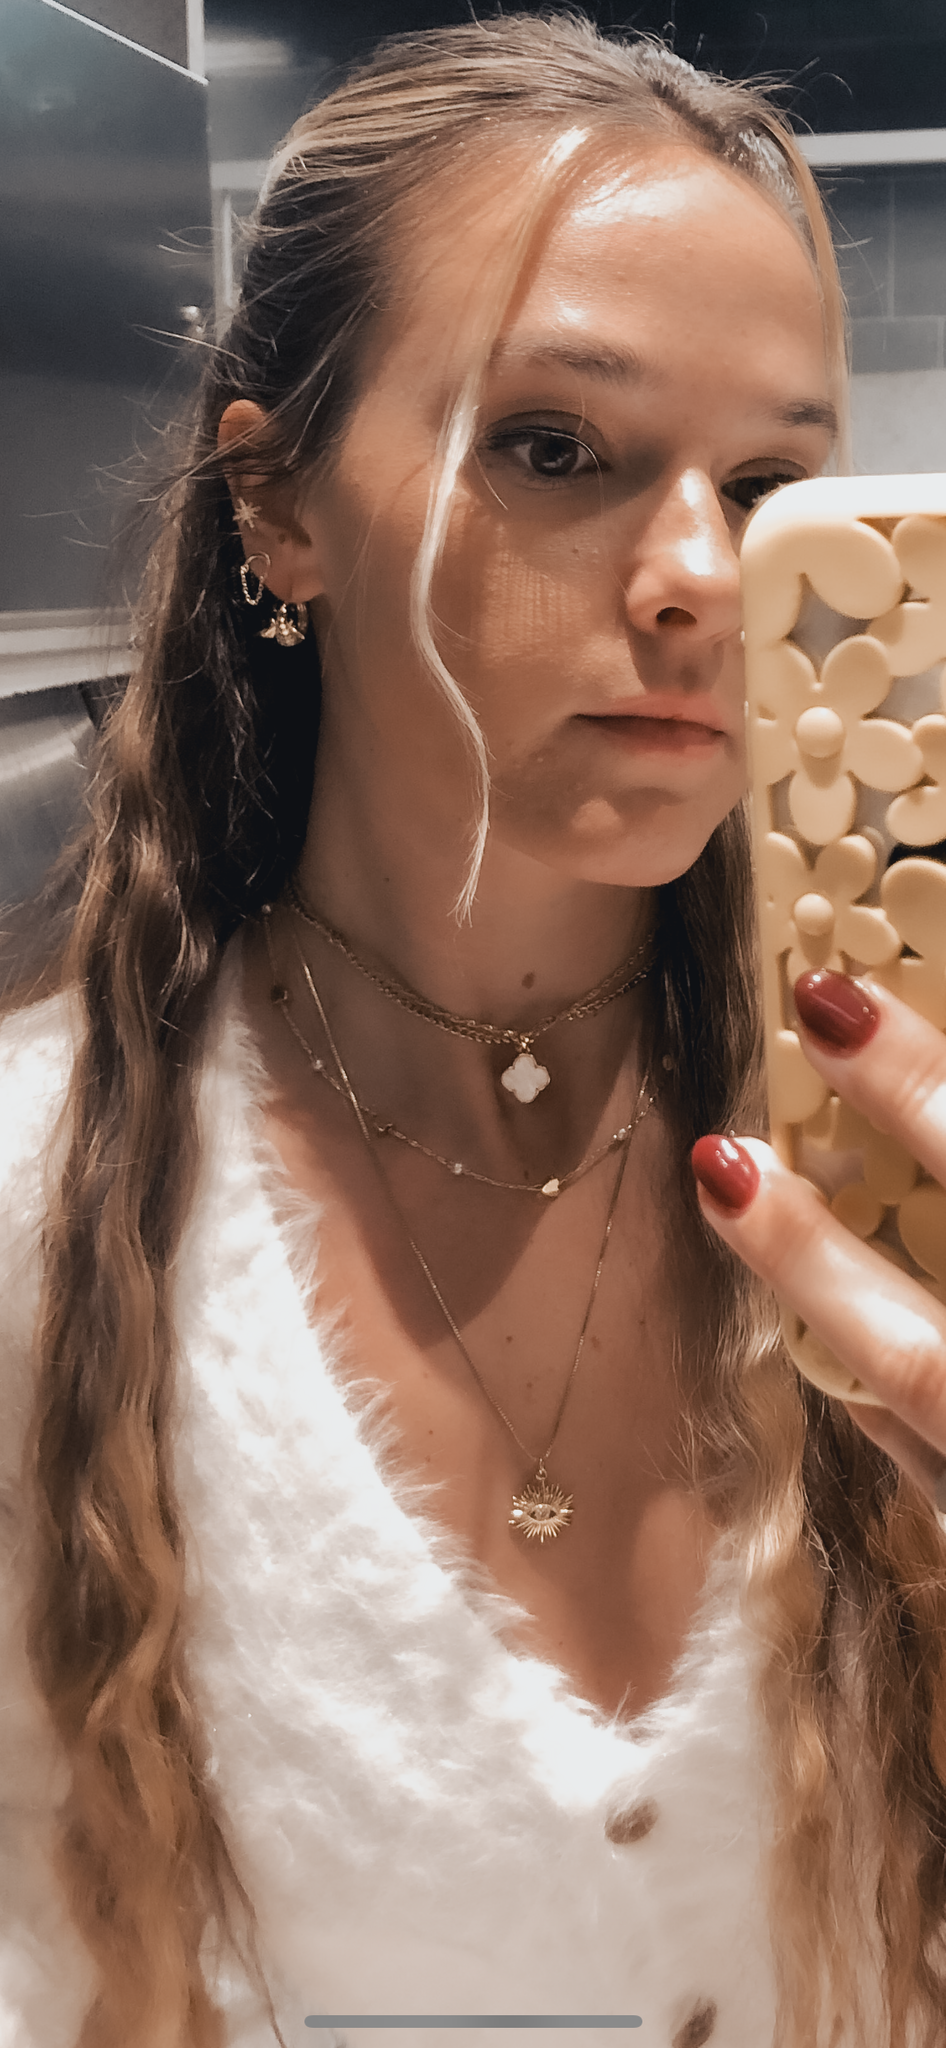 Mother of Pearl Clover Choker